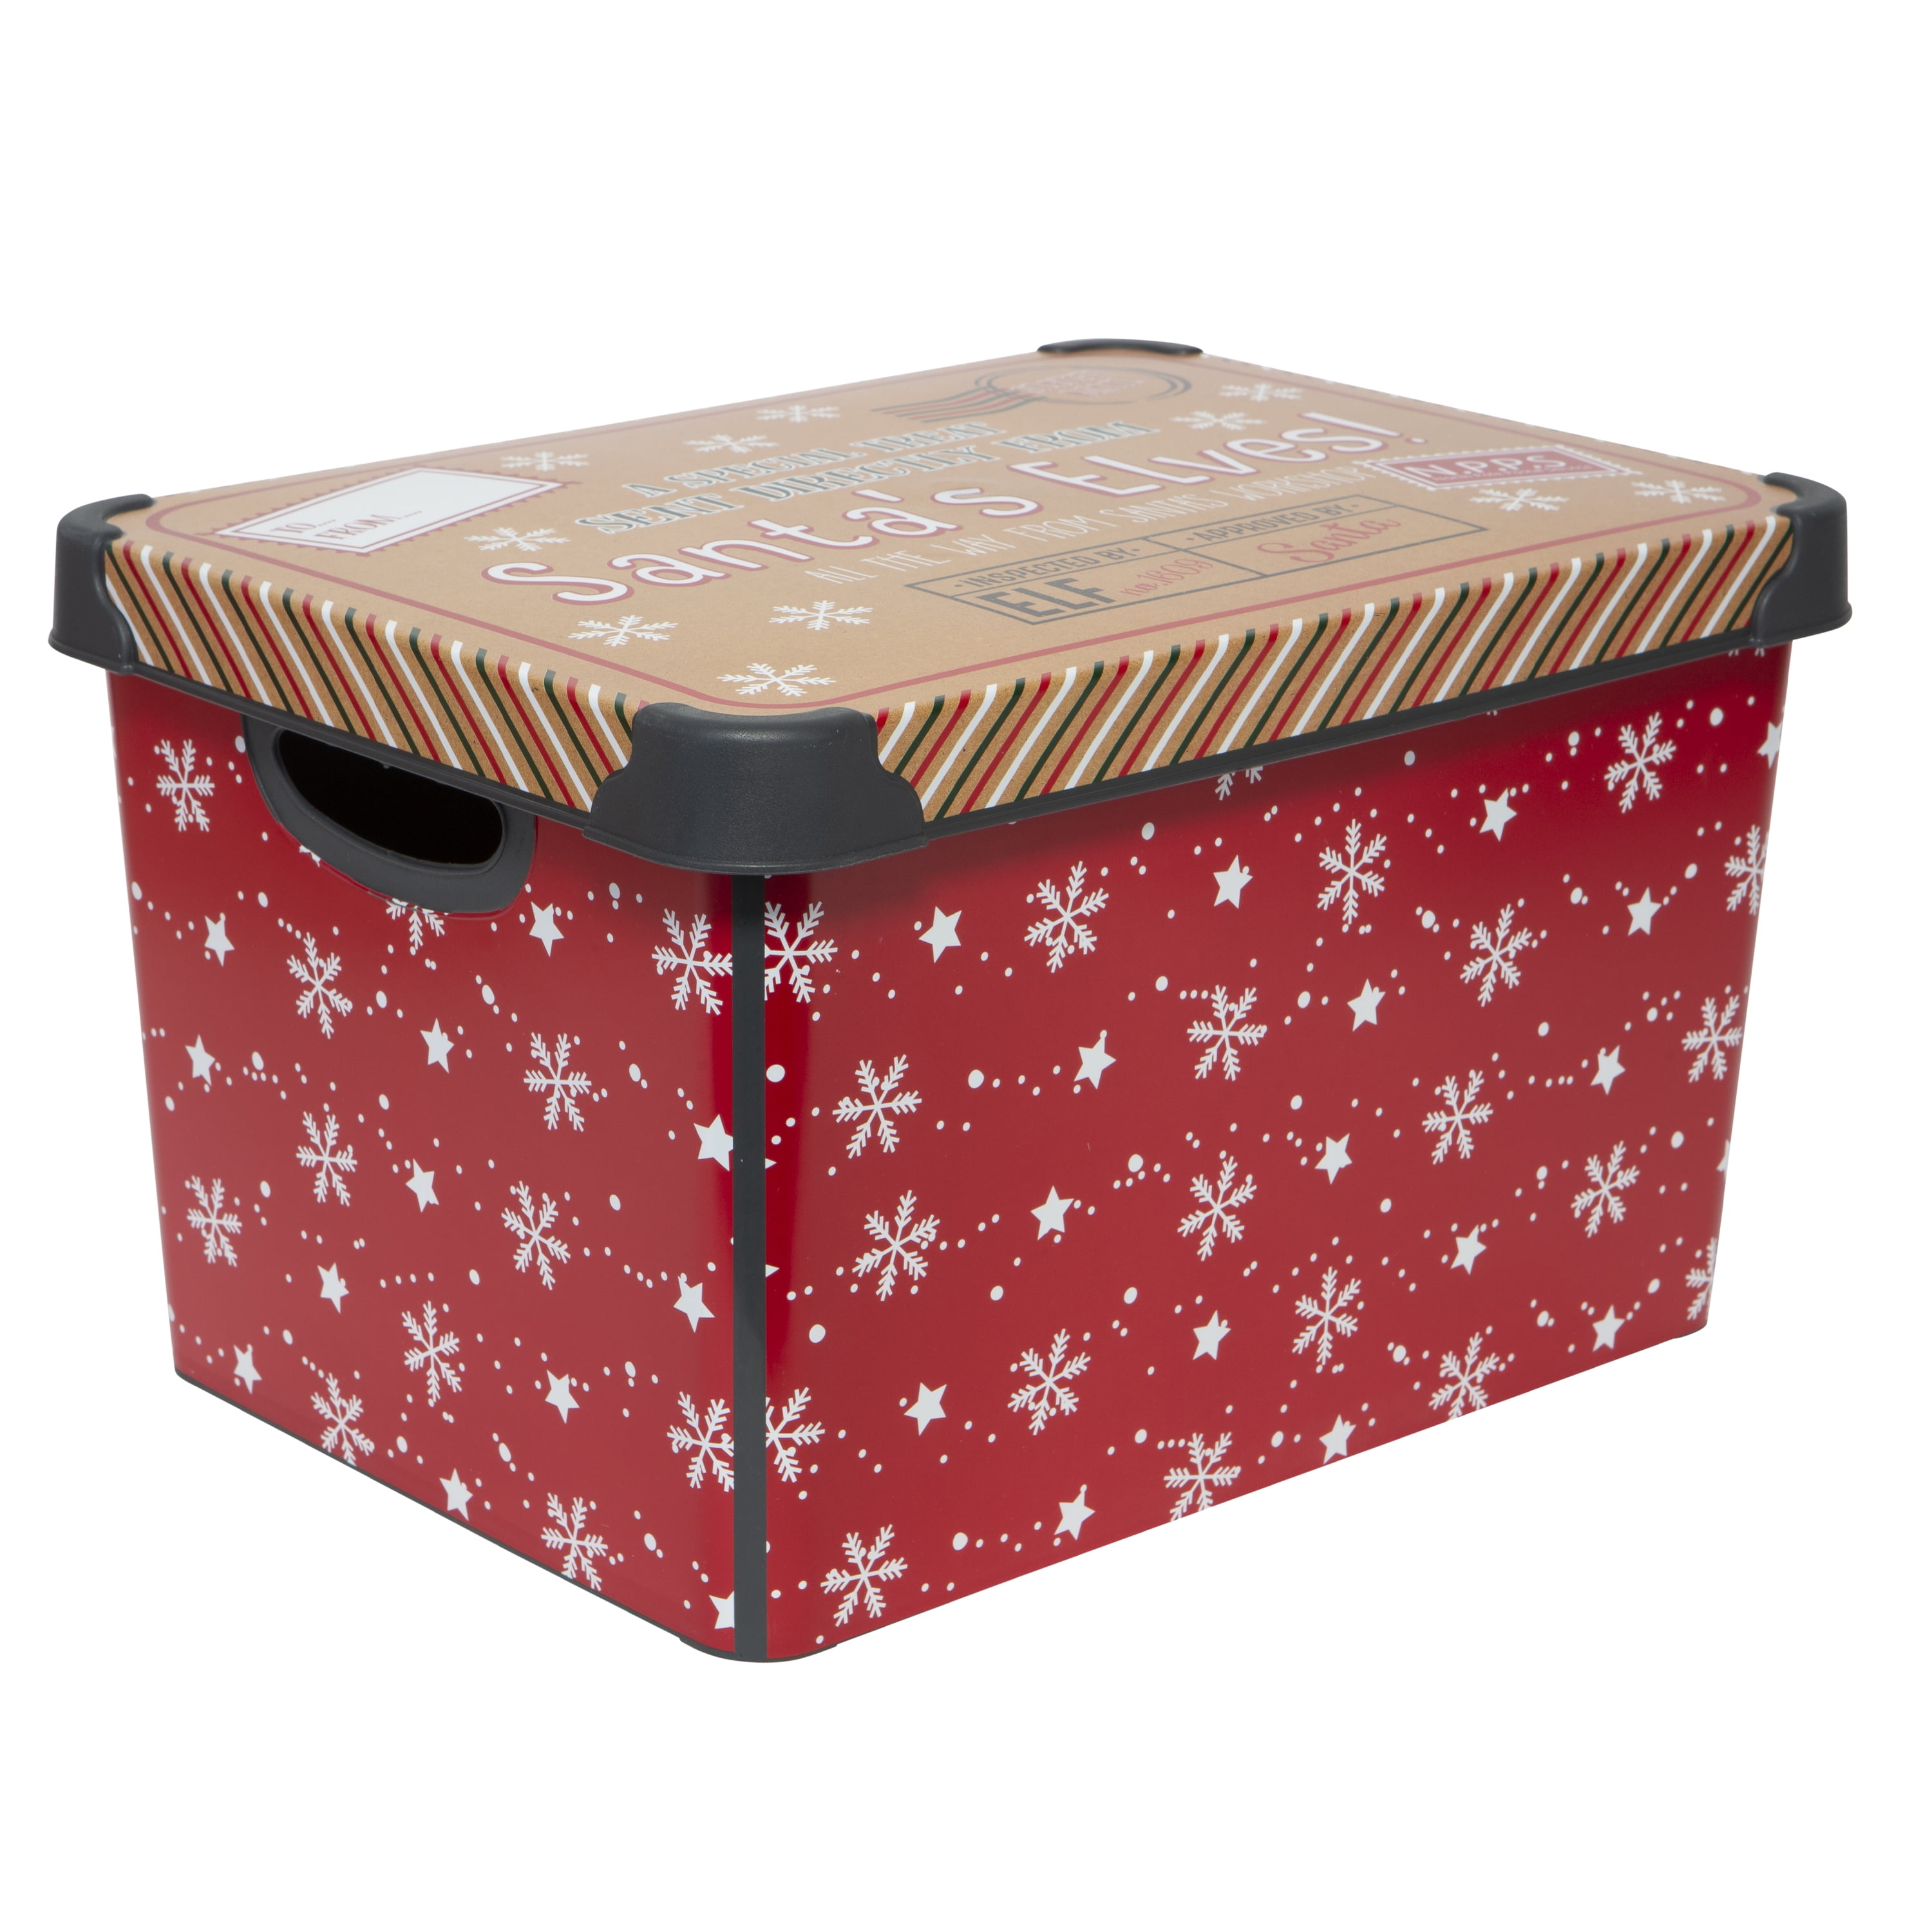 Toy Storage and Organization with Bliss Bins! #christmasgifts #organization  #christmas #storagebins 